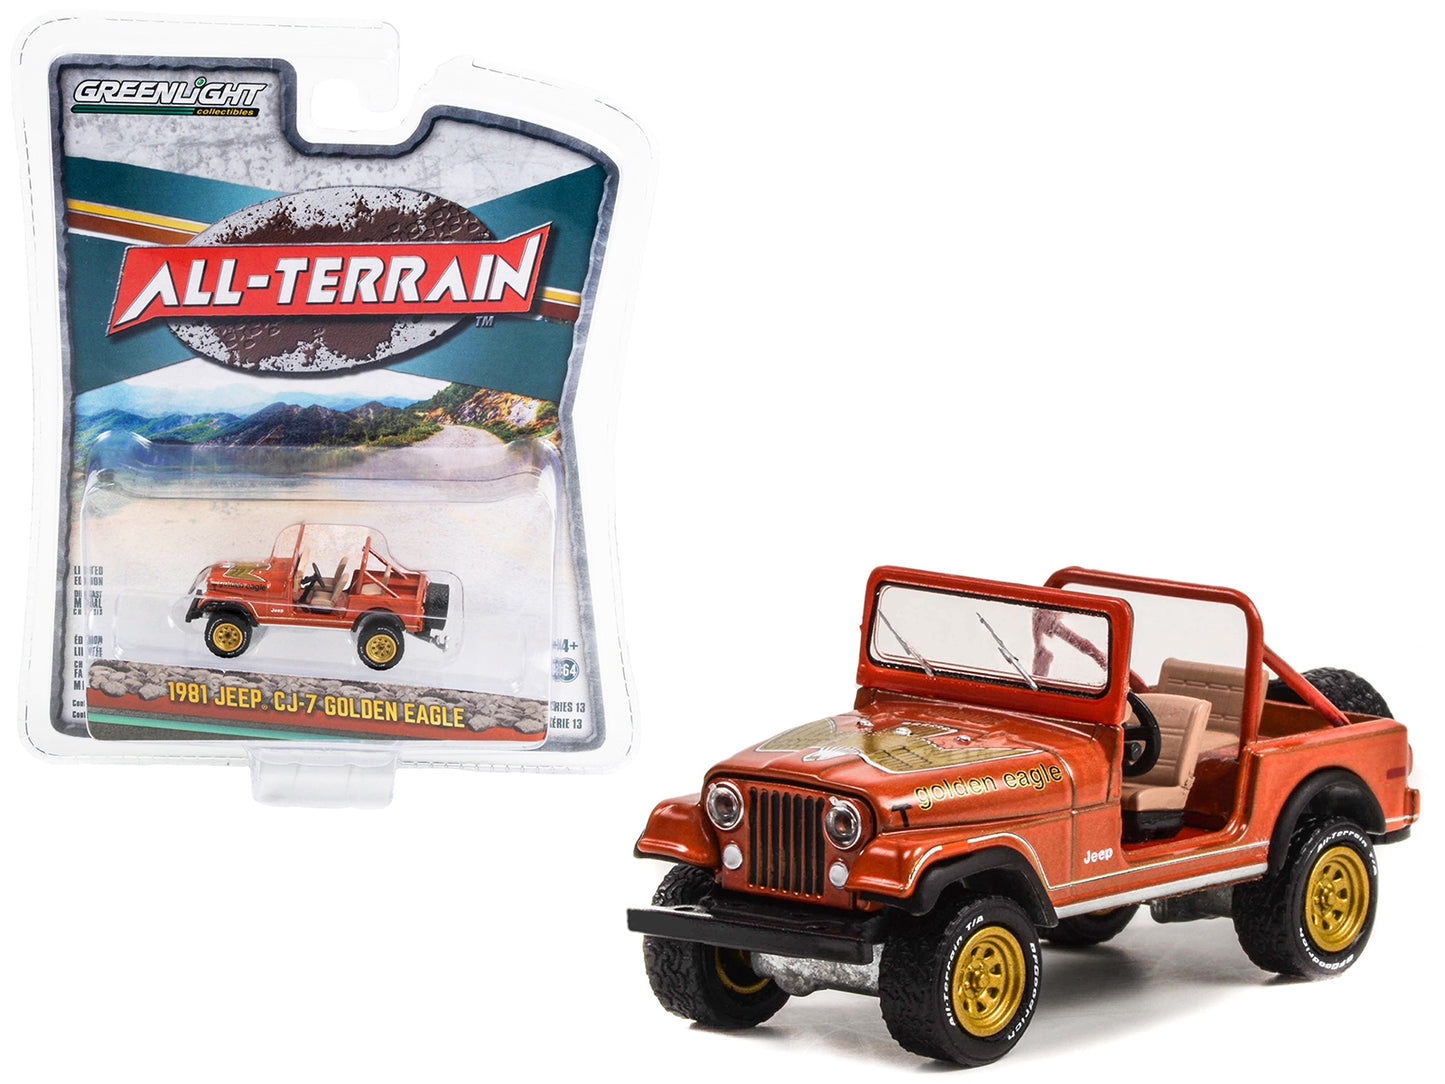 1981 Jeep CJ-7 Golden Eagle Russet Brown Metallic with Graphics "All Terrain" Series 13 1/64 Diecast Model Car by Greenlight